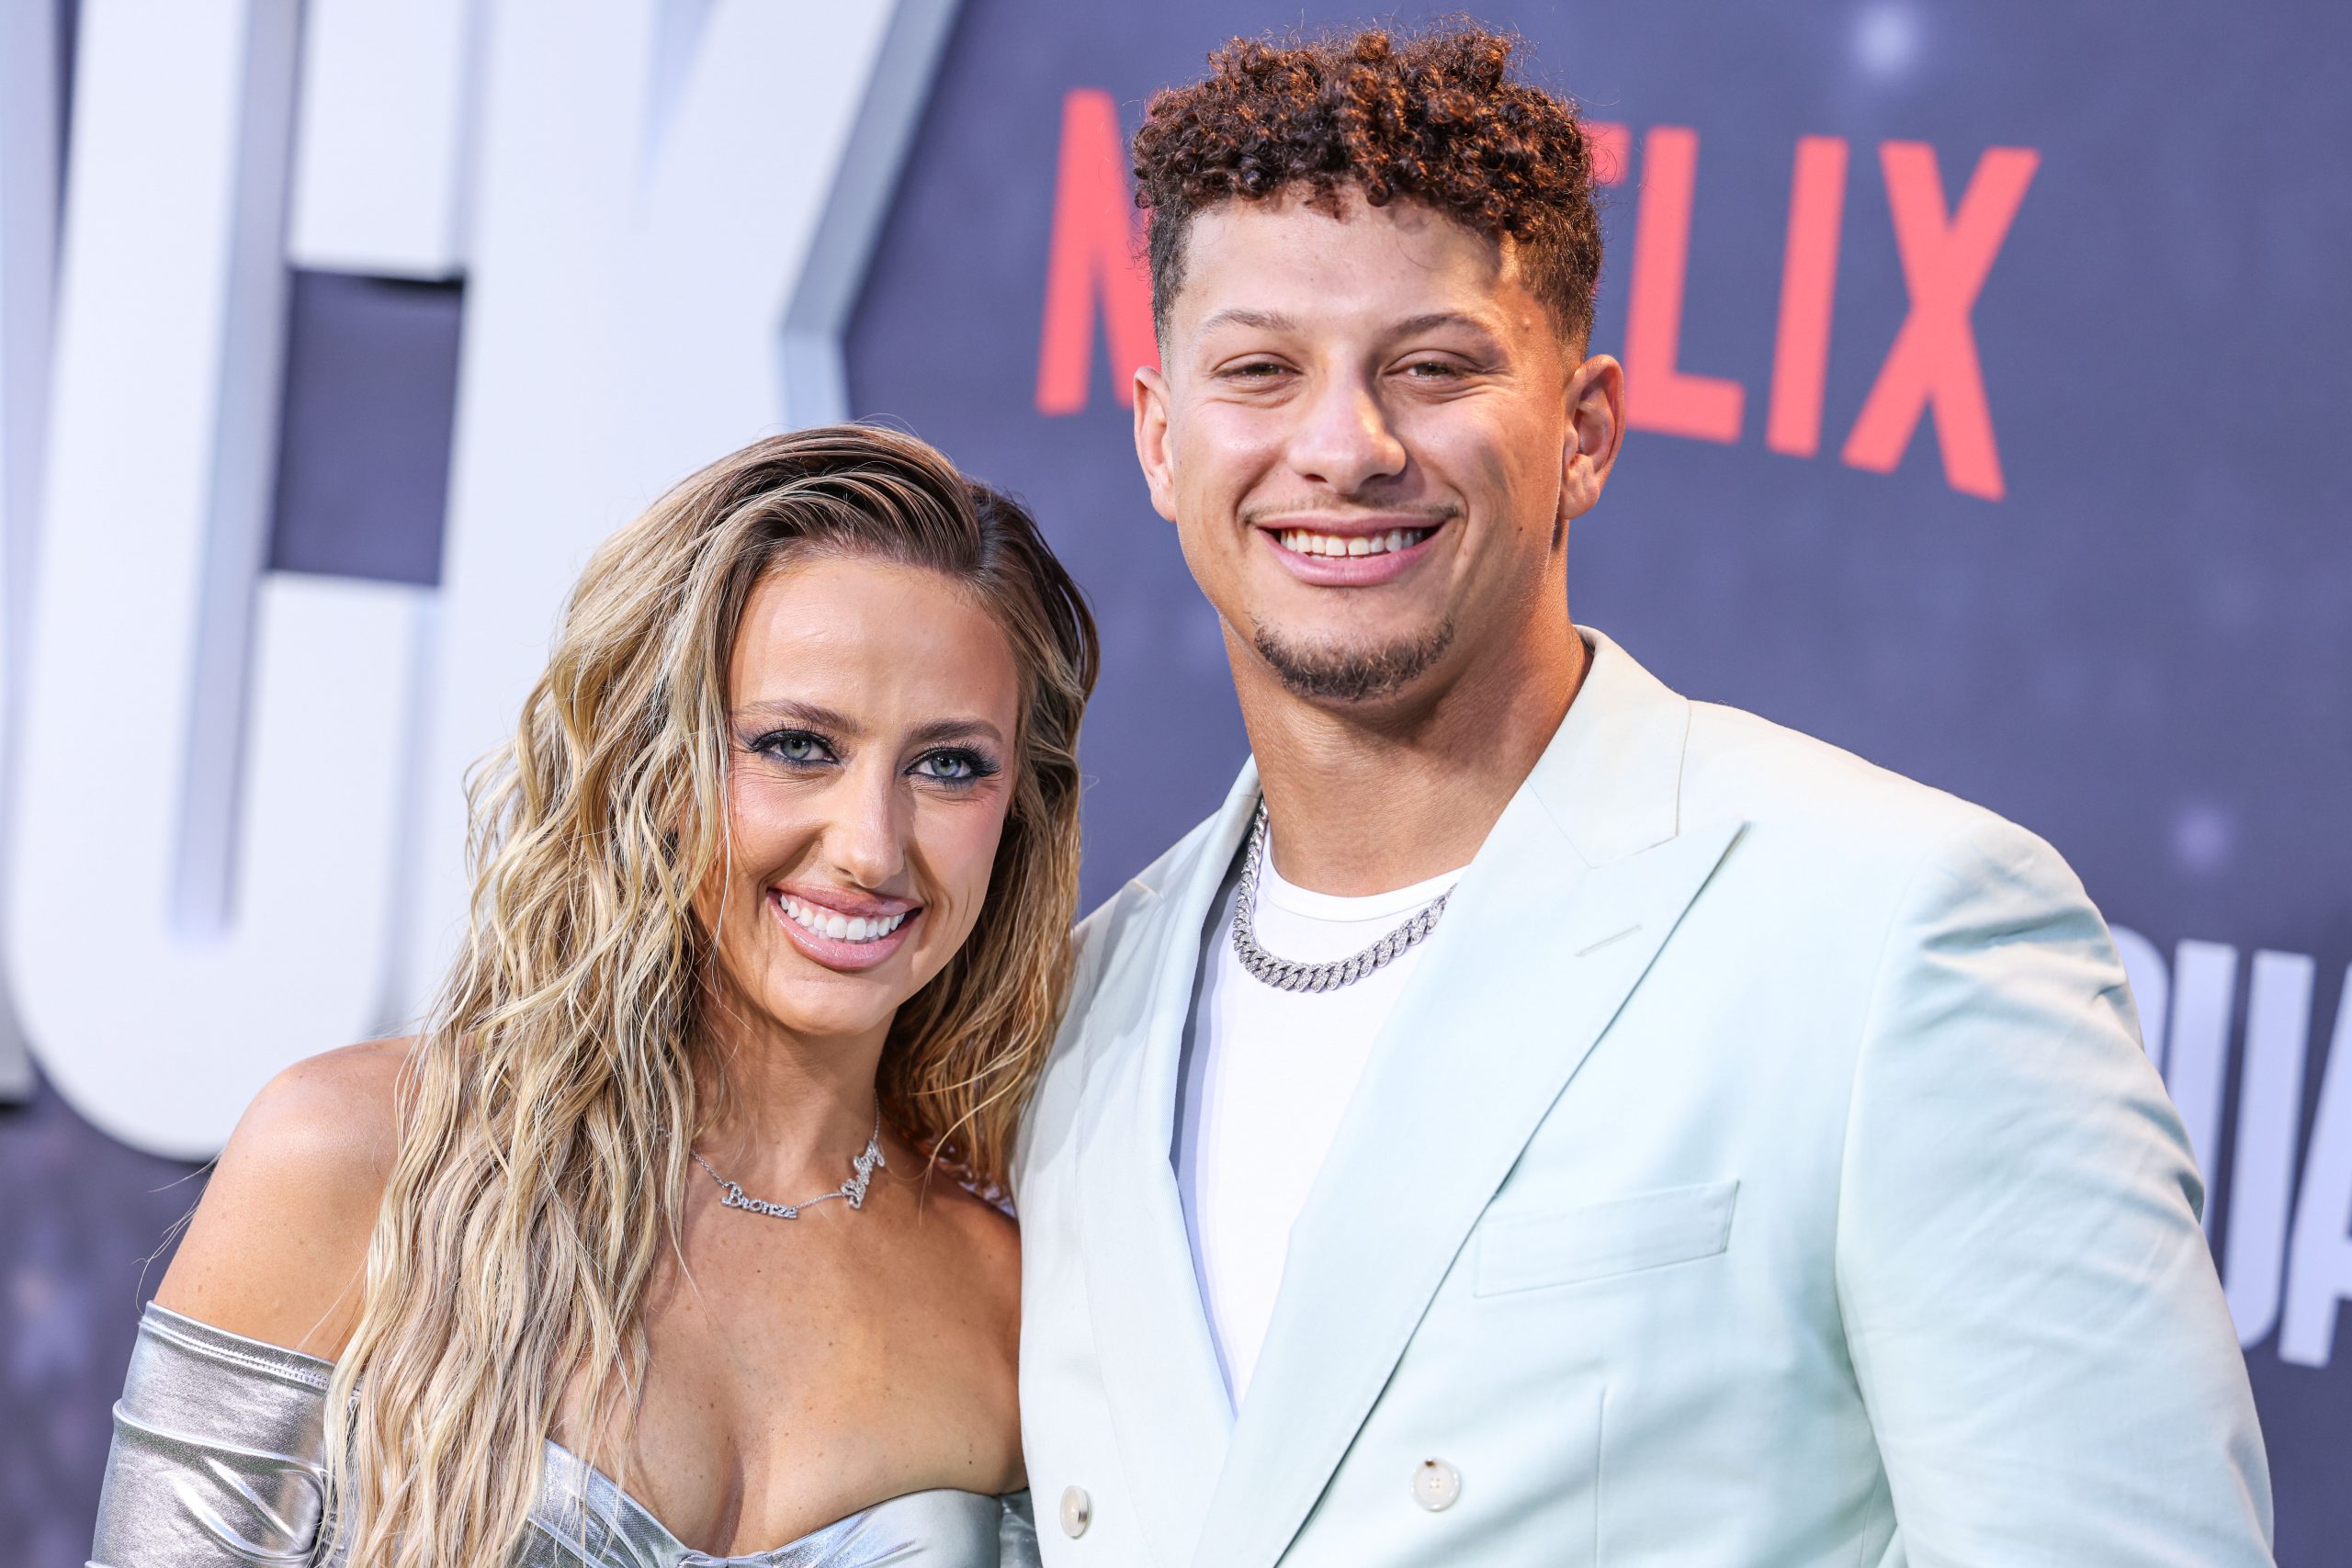 Brittany Mahomes and husband/American football quarterback for the Kansas City Chiefs of the National Football League Patrick Mahomes arrive at the Los Angeles Premiere Of Netflix's 'Quarterback' Season 1 held at the Netflix Tudum Theater on July 11, 2023 in Hollywood, Los Angeles, California, United States. (Photo by Xavier Collin/Image Press Agency)